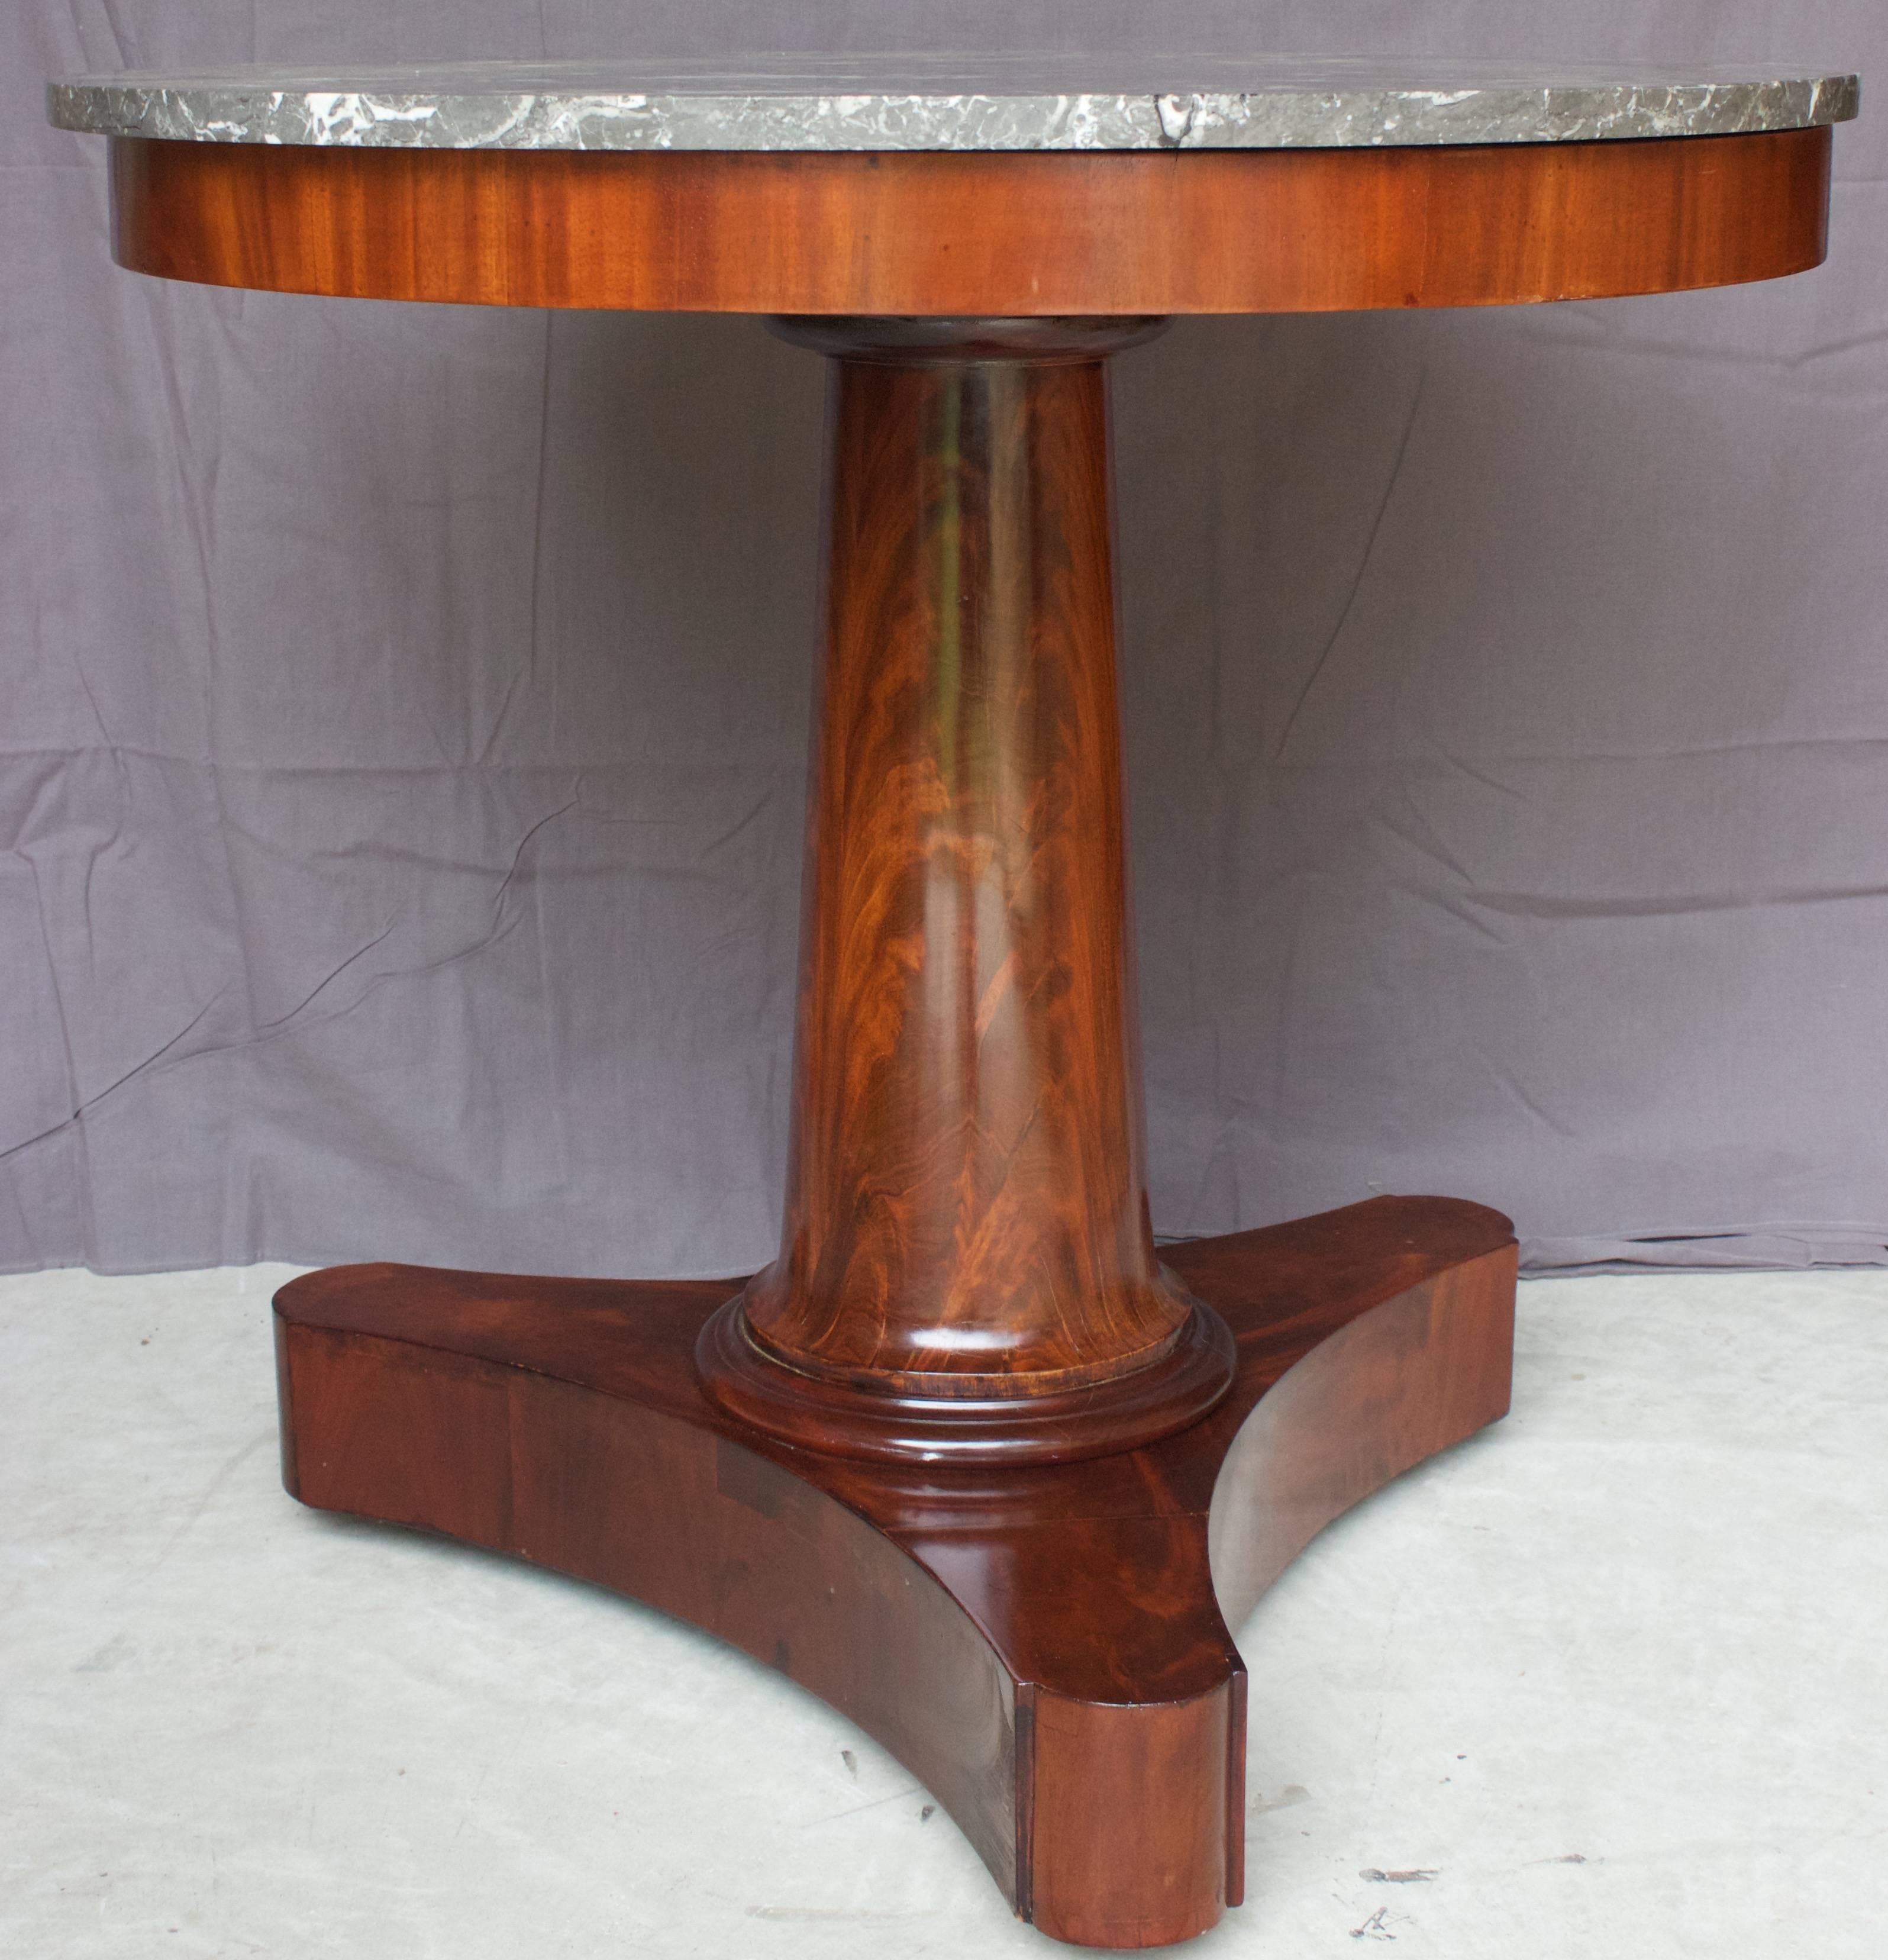 A very fine French Empire guéridon with its marble top on a mahogany veneered oak support above a cylindrical column resting on a tripod base with its original castors. French polished flamed mahogany on oak and grey Sainte-Anne marble top.
Very